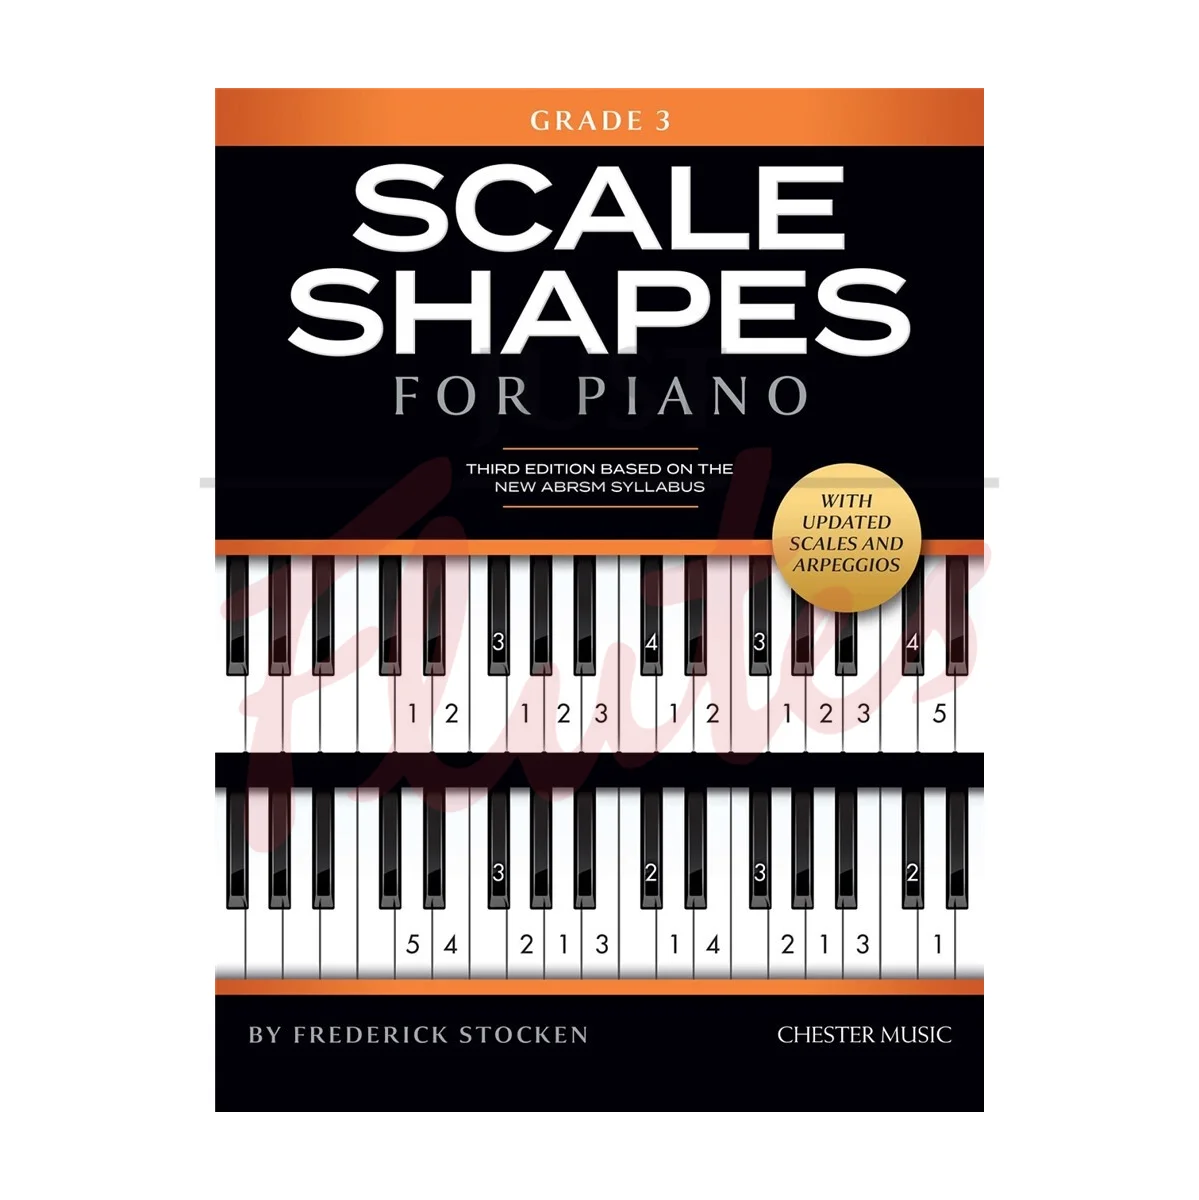 Scale Shapes for Piano - Grade 3 (3rd Edition)